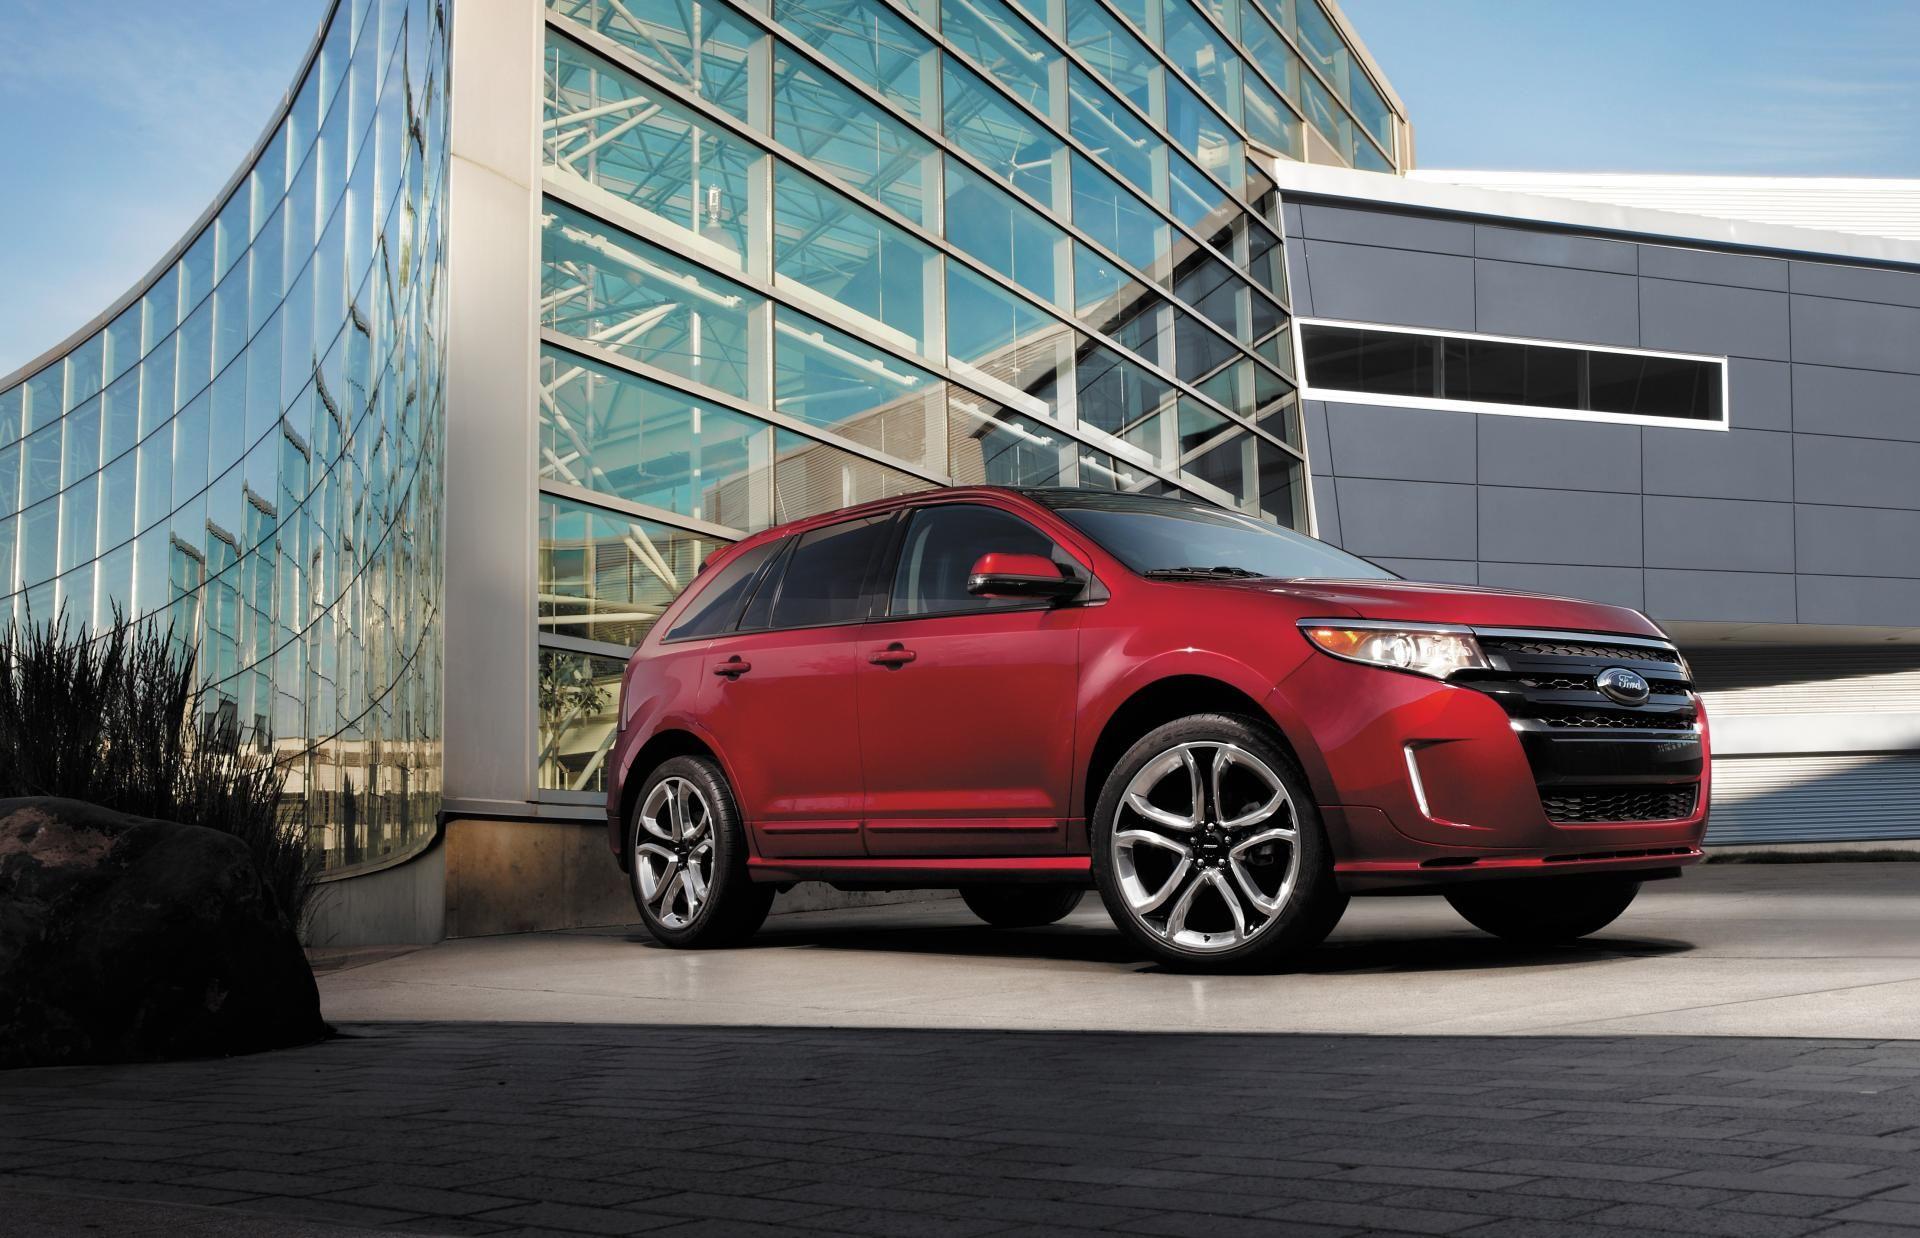 Ford Edge News and Information